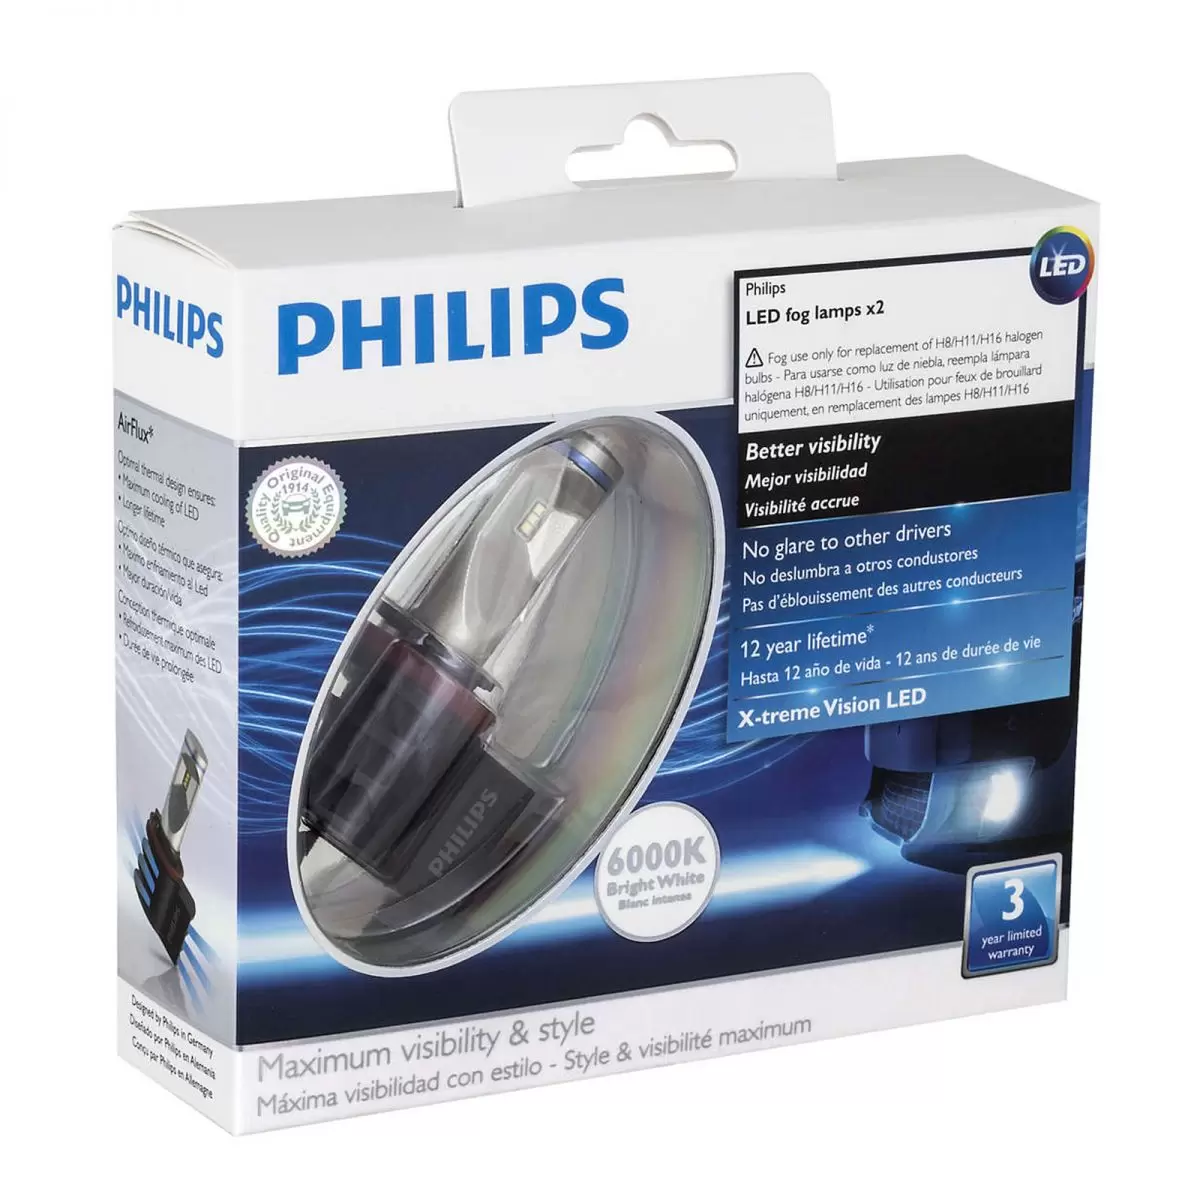 Philips Vision LED Fog Lamps Information & Review | PowerBulbs EU